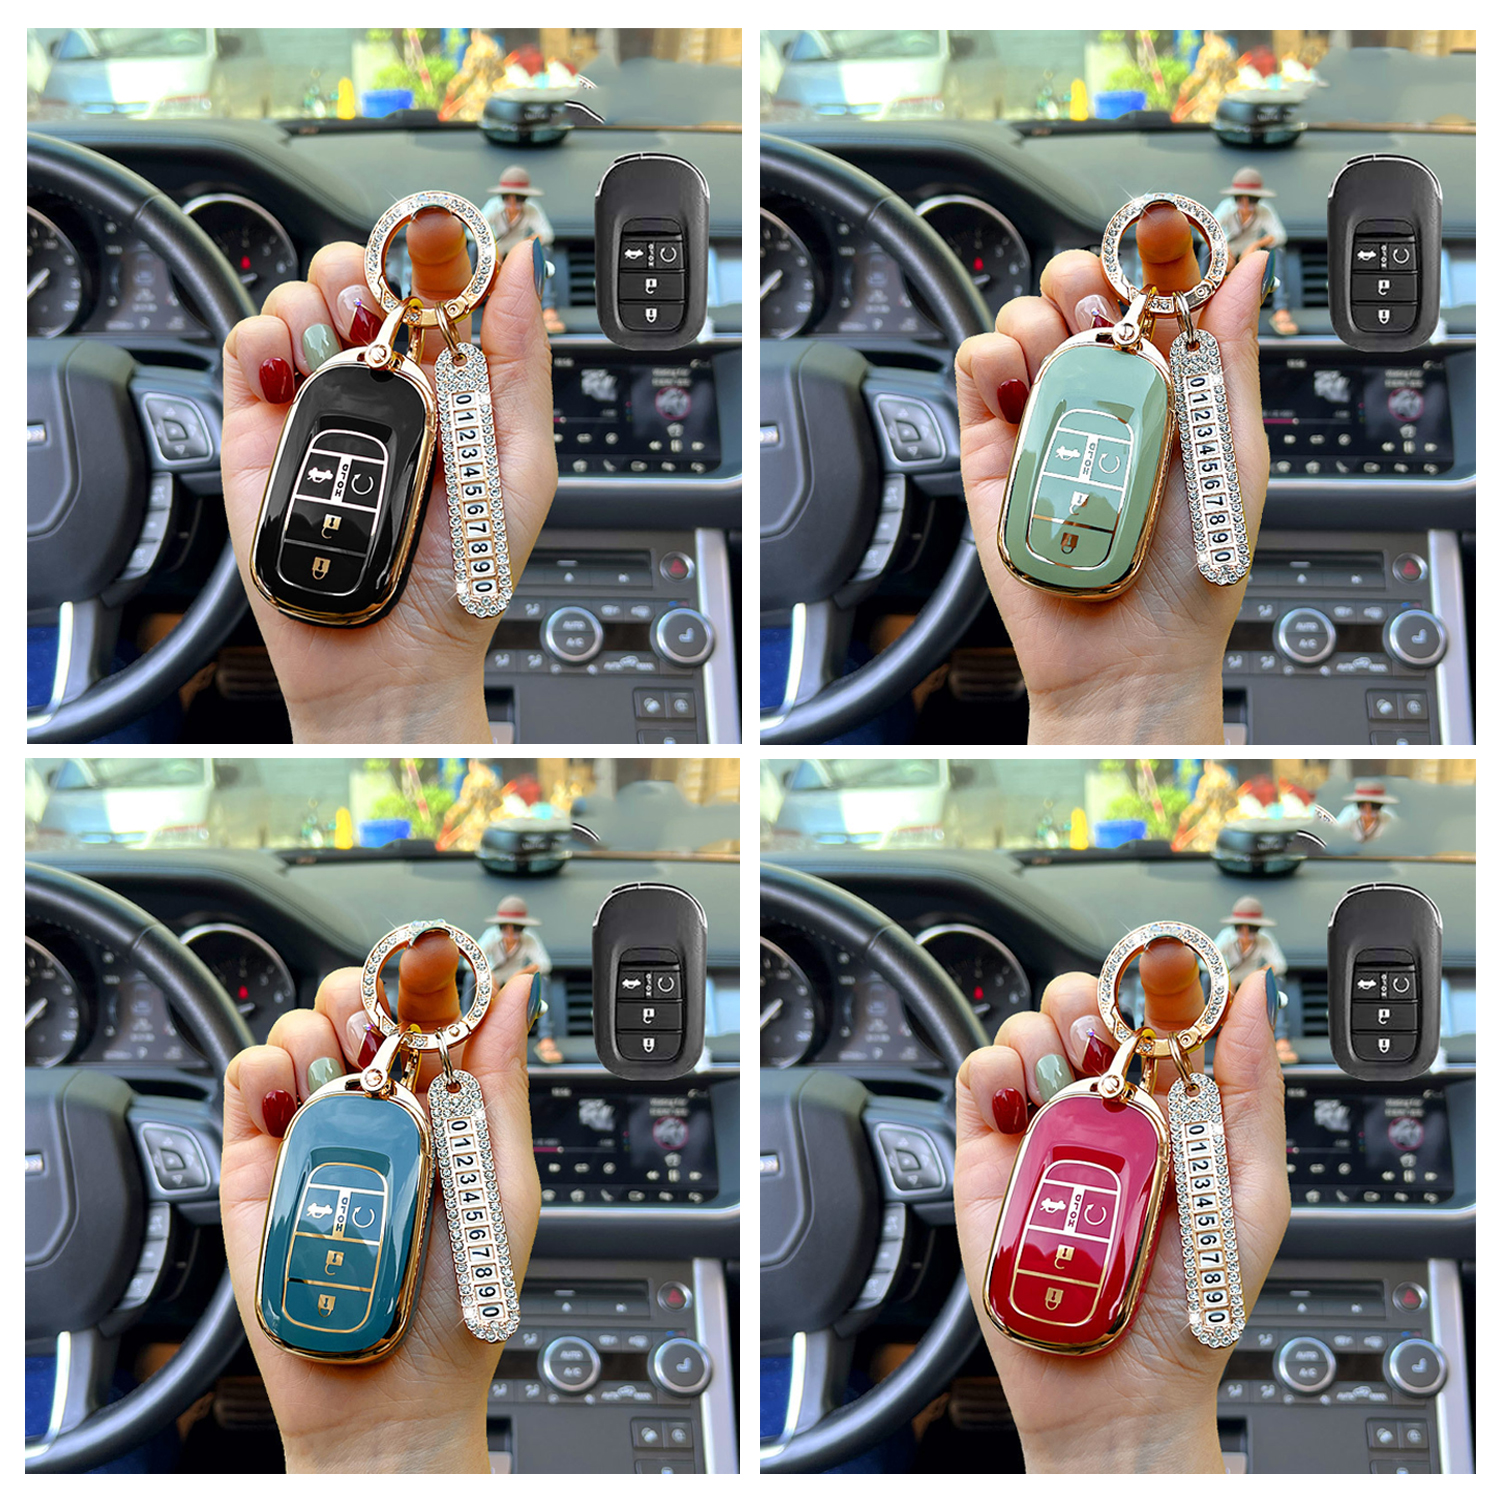 TPU Car Remote Key Case Cover Shell For Fob Honda Civic 2022 4 Buttons Protector Holder Keyless Keychain Men Women Accessories